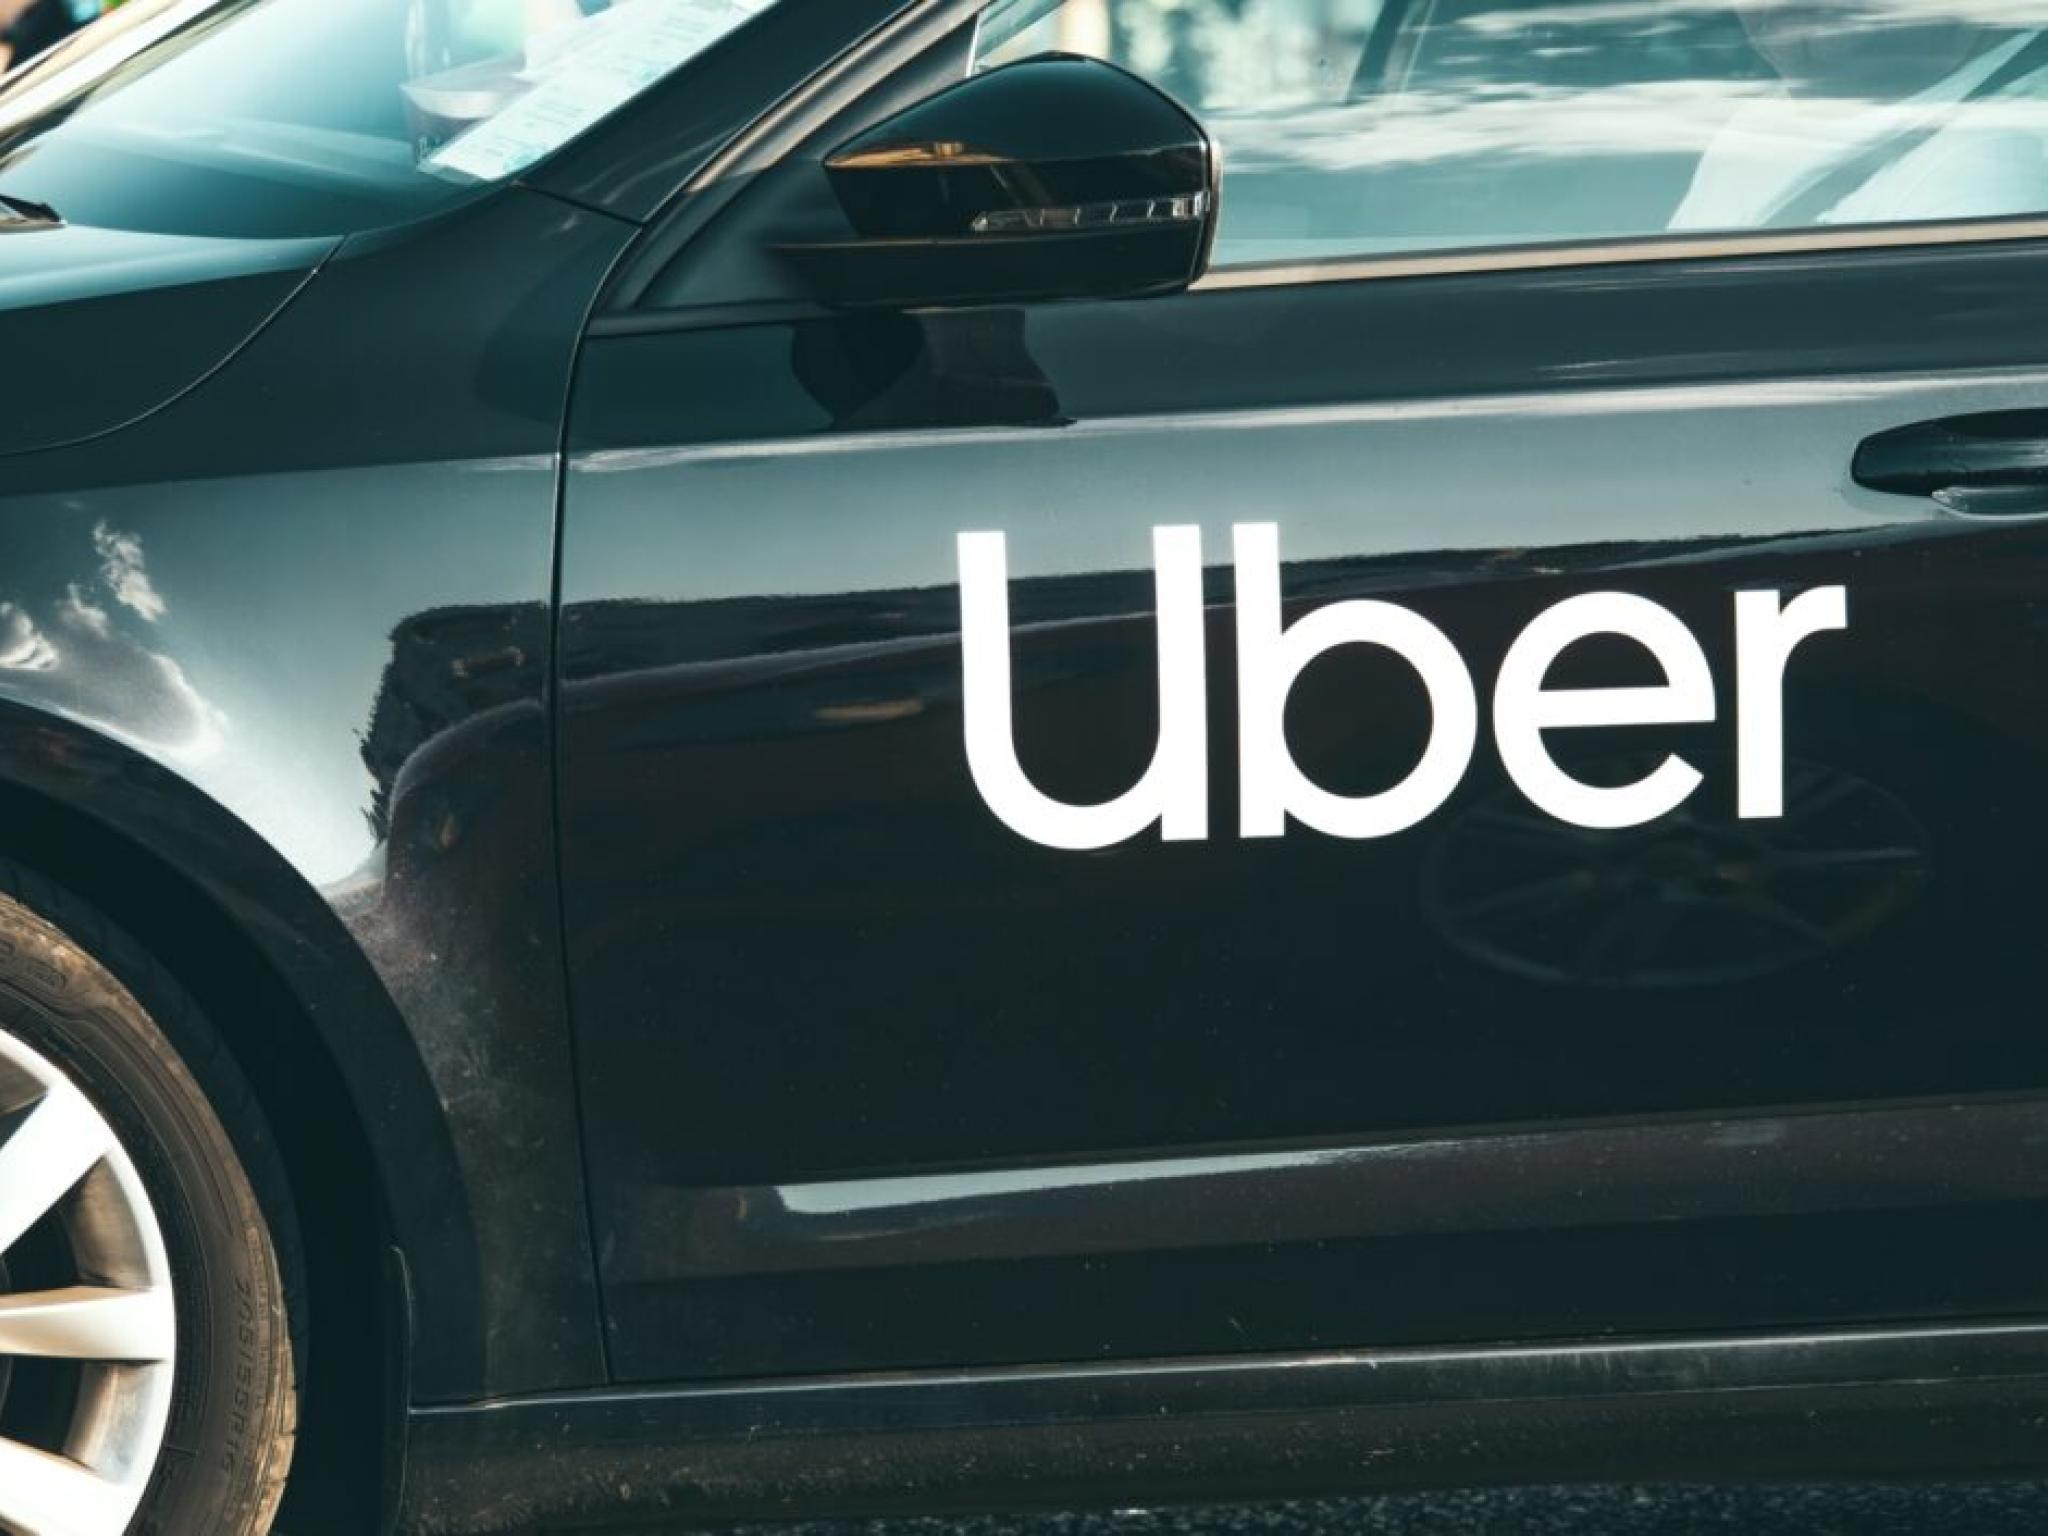  uber-to-rally-around-38-here-are-10-top-analyst-forecasts-for-wednesday 